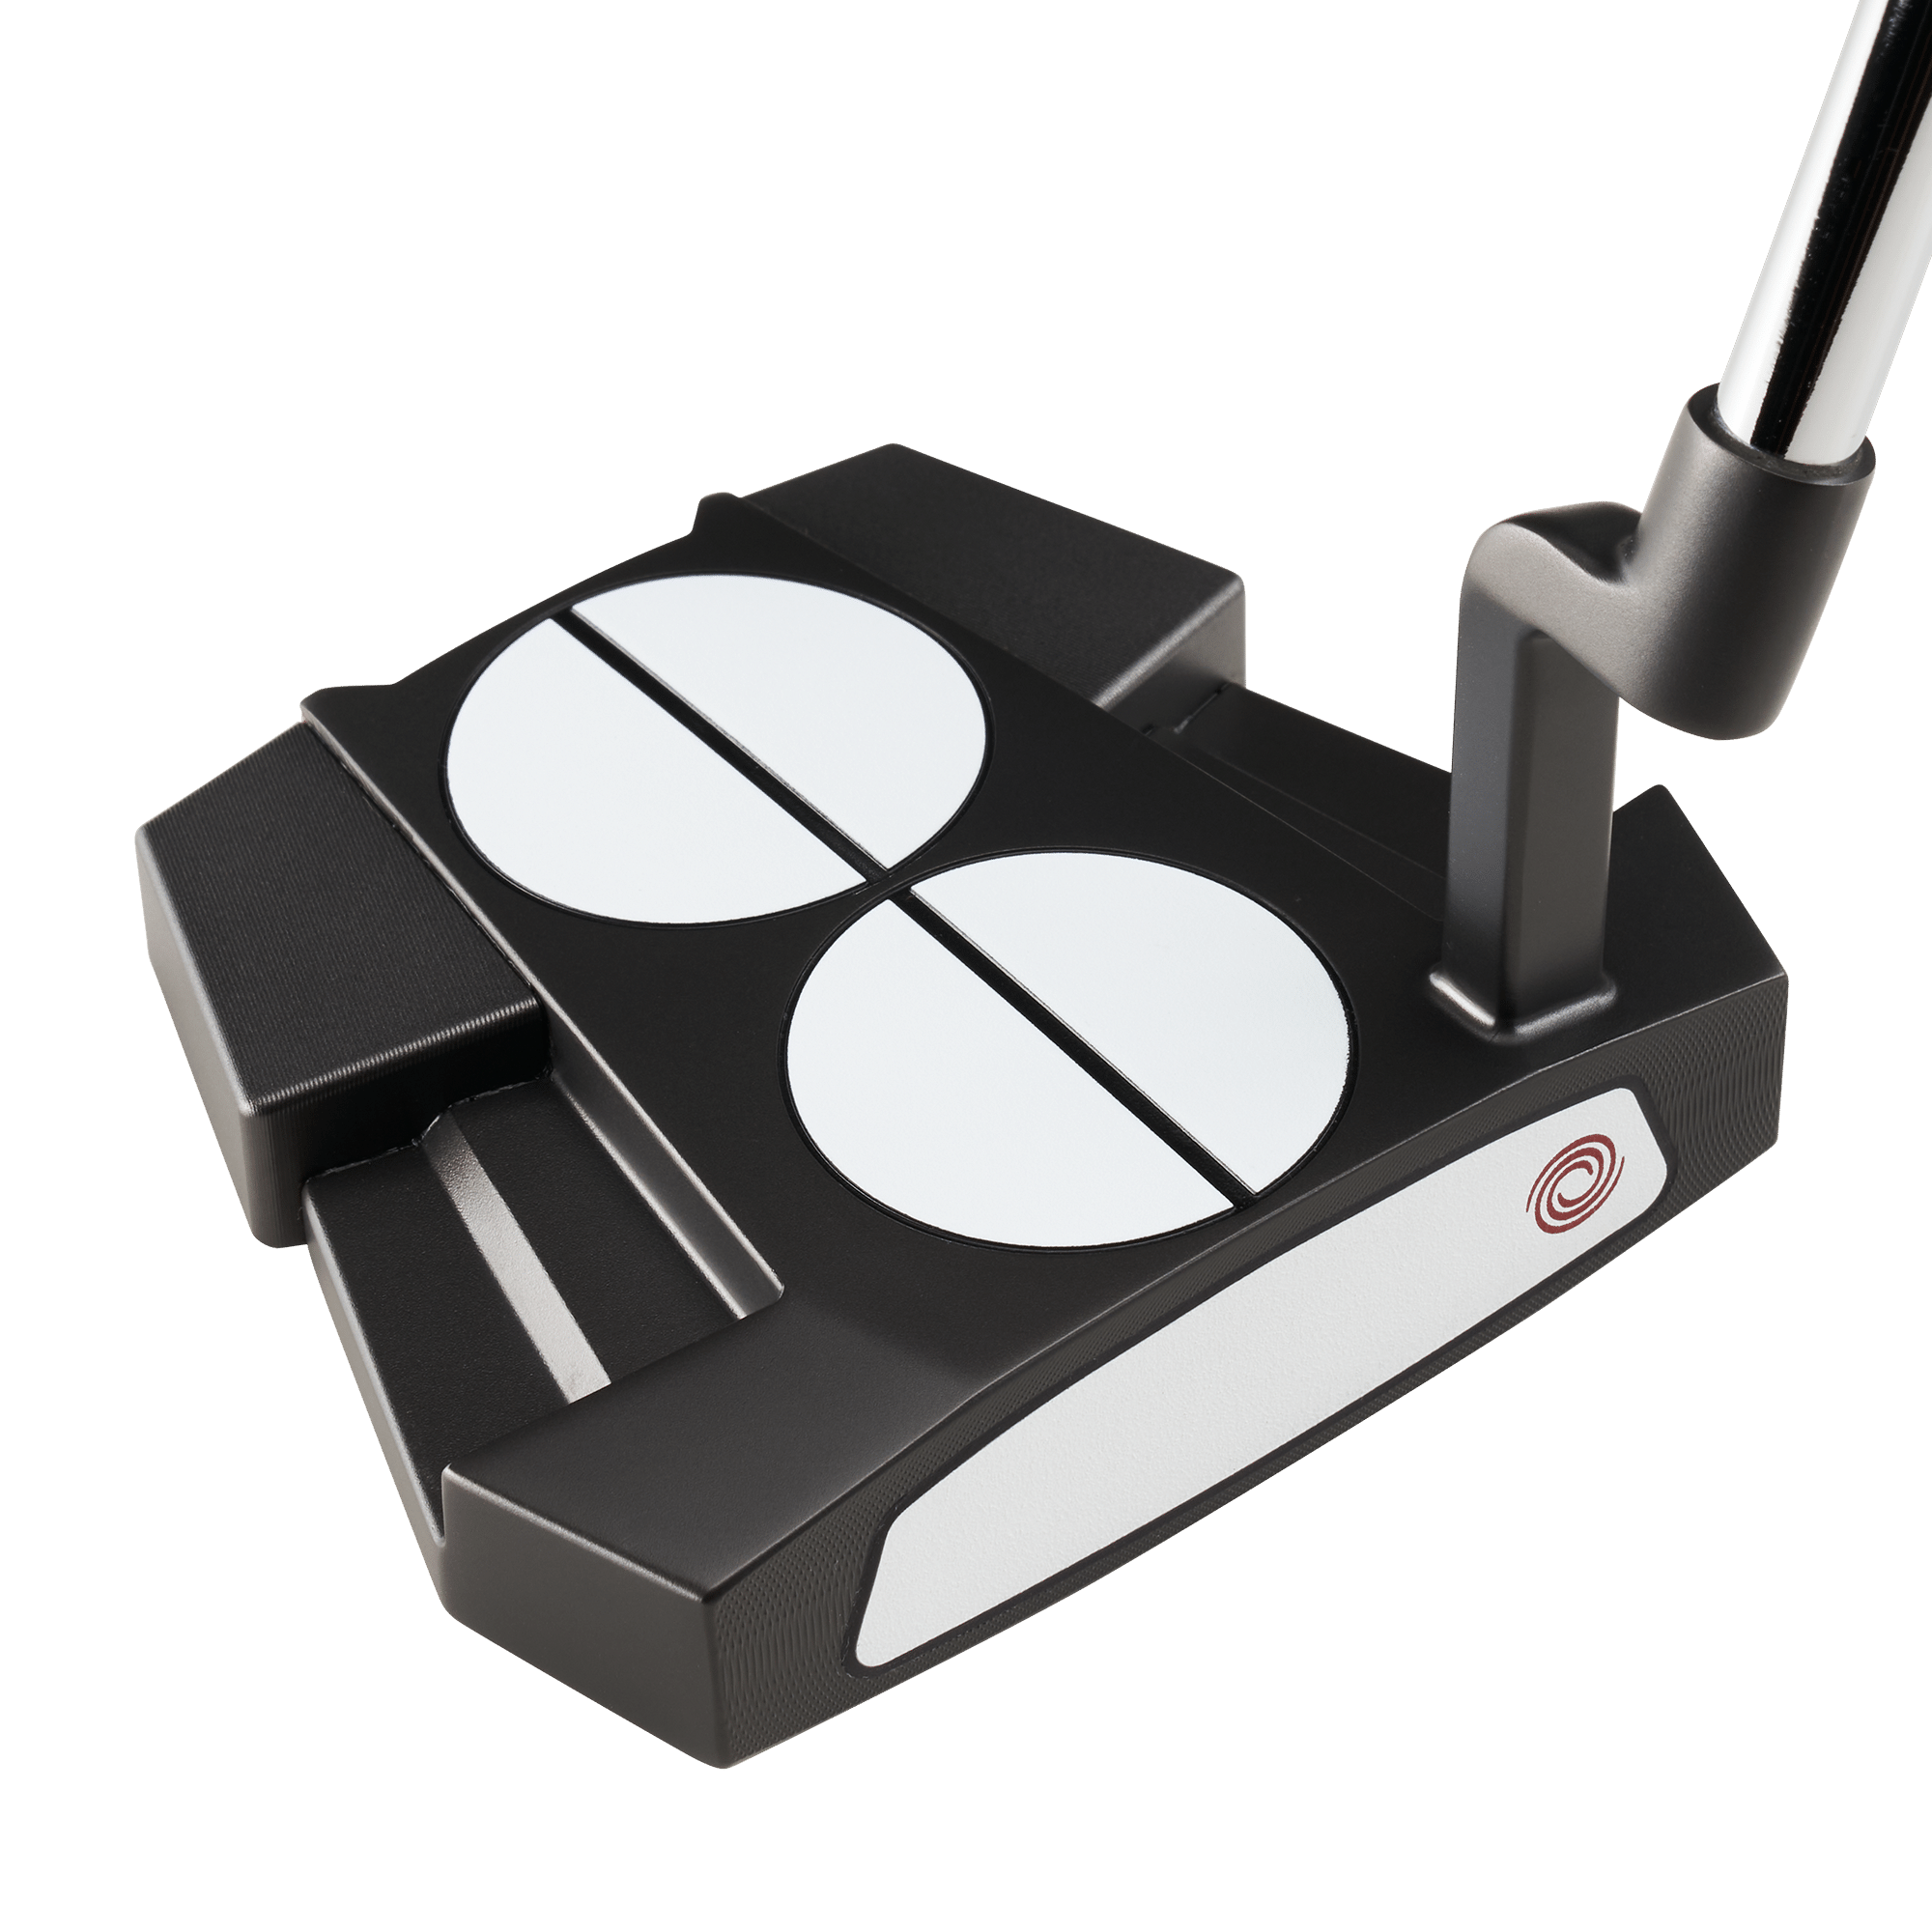 Odyssey 2-Ball Eleven Tour Lined CH Putter | Callaway Golf Pre-Owned